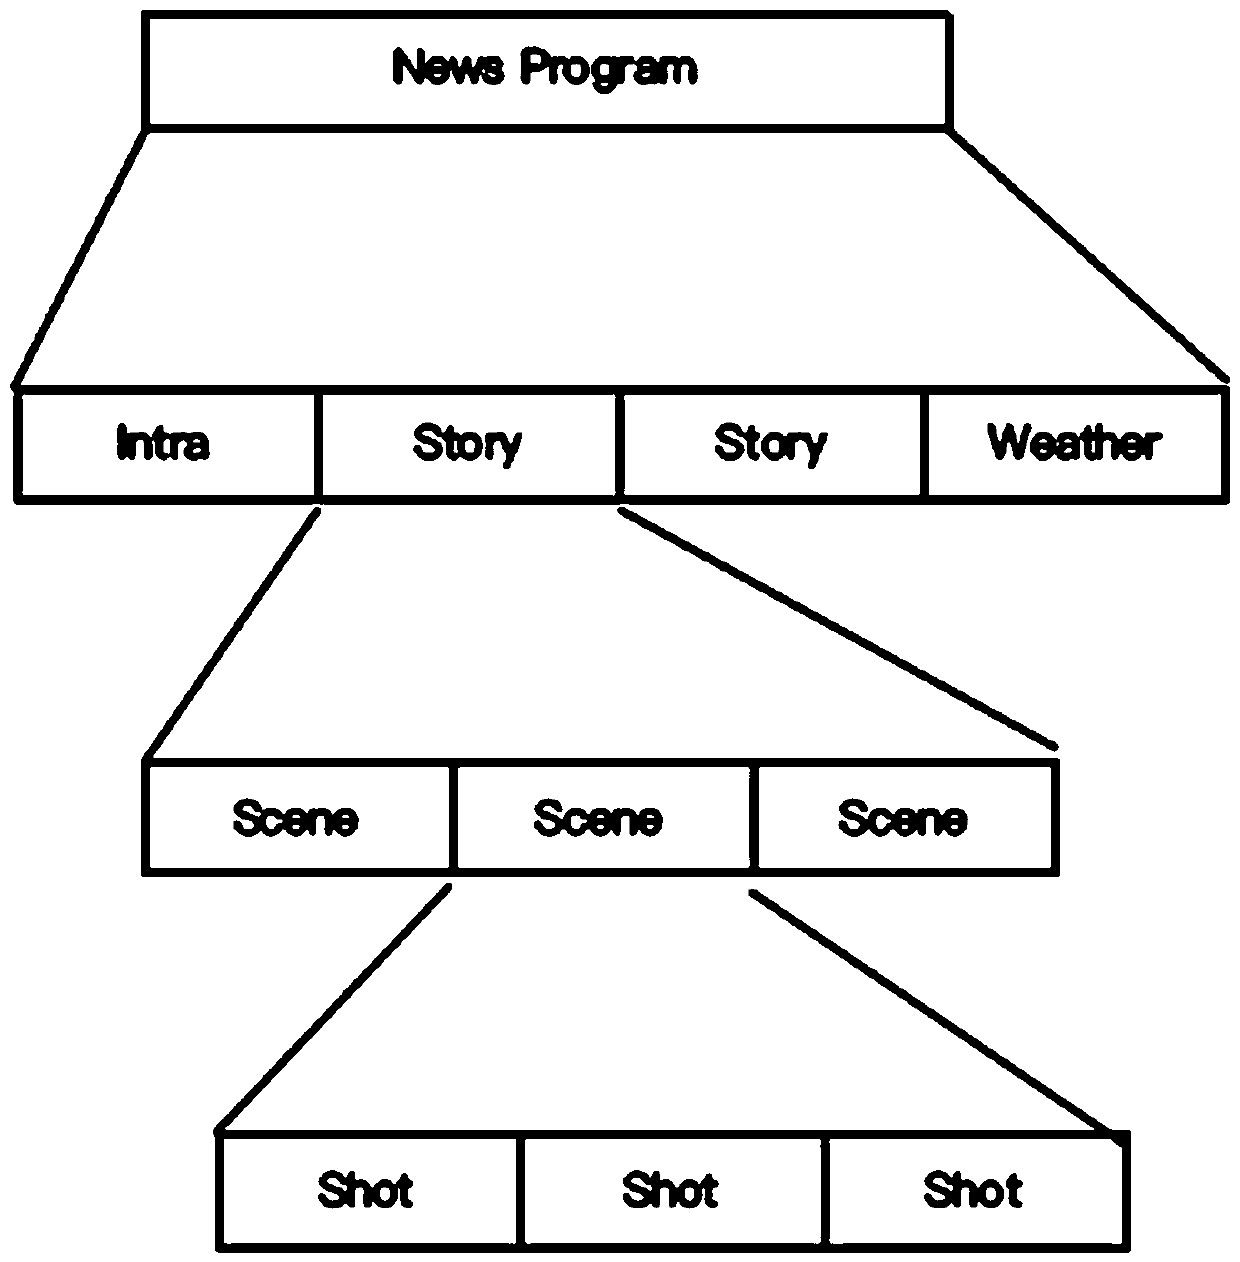 End-to-end news program structuring method and structuring framework system thereof